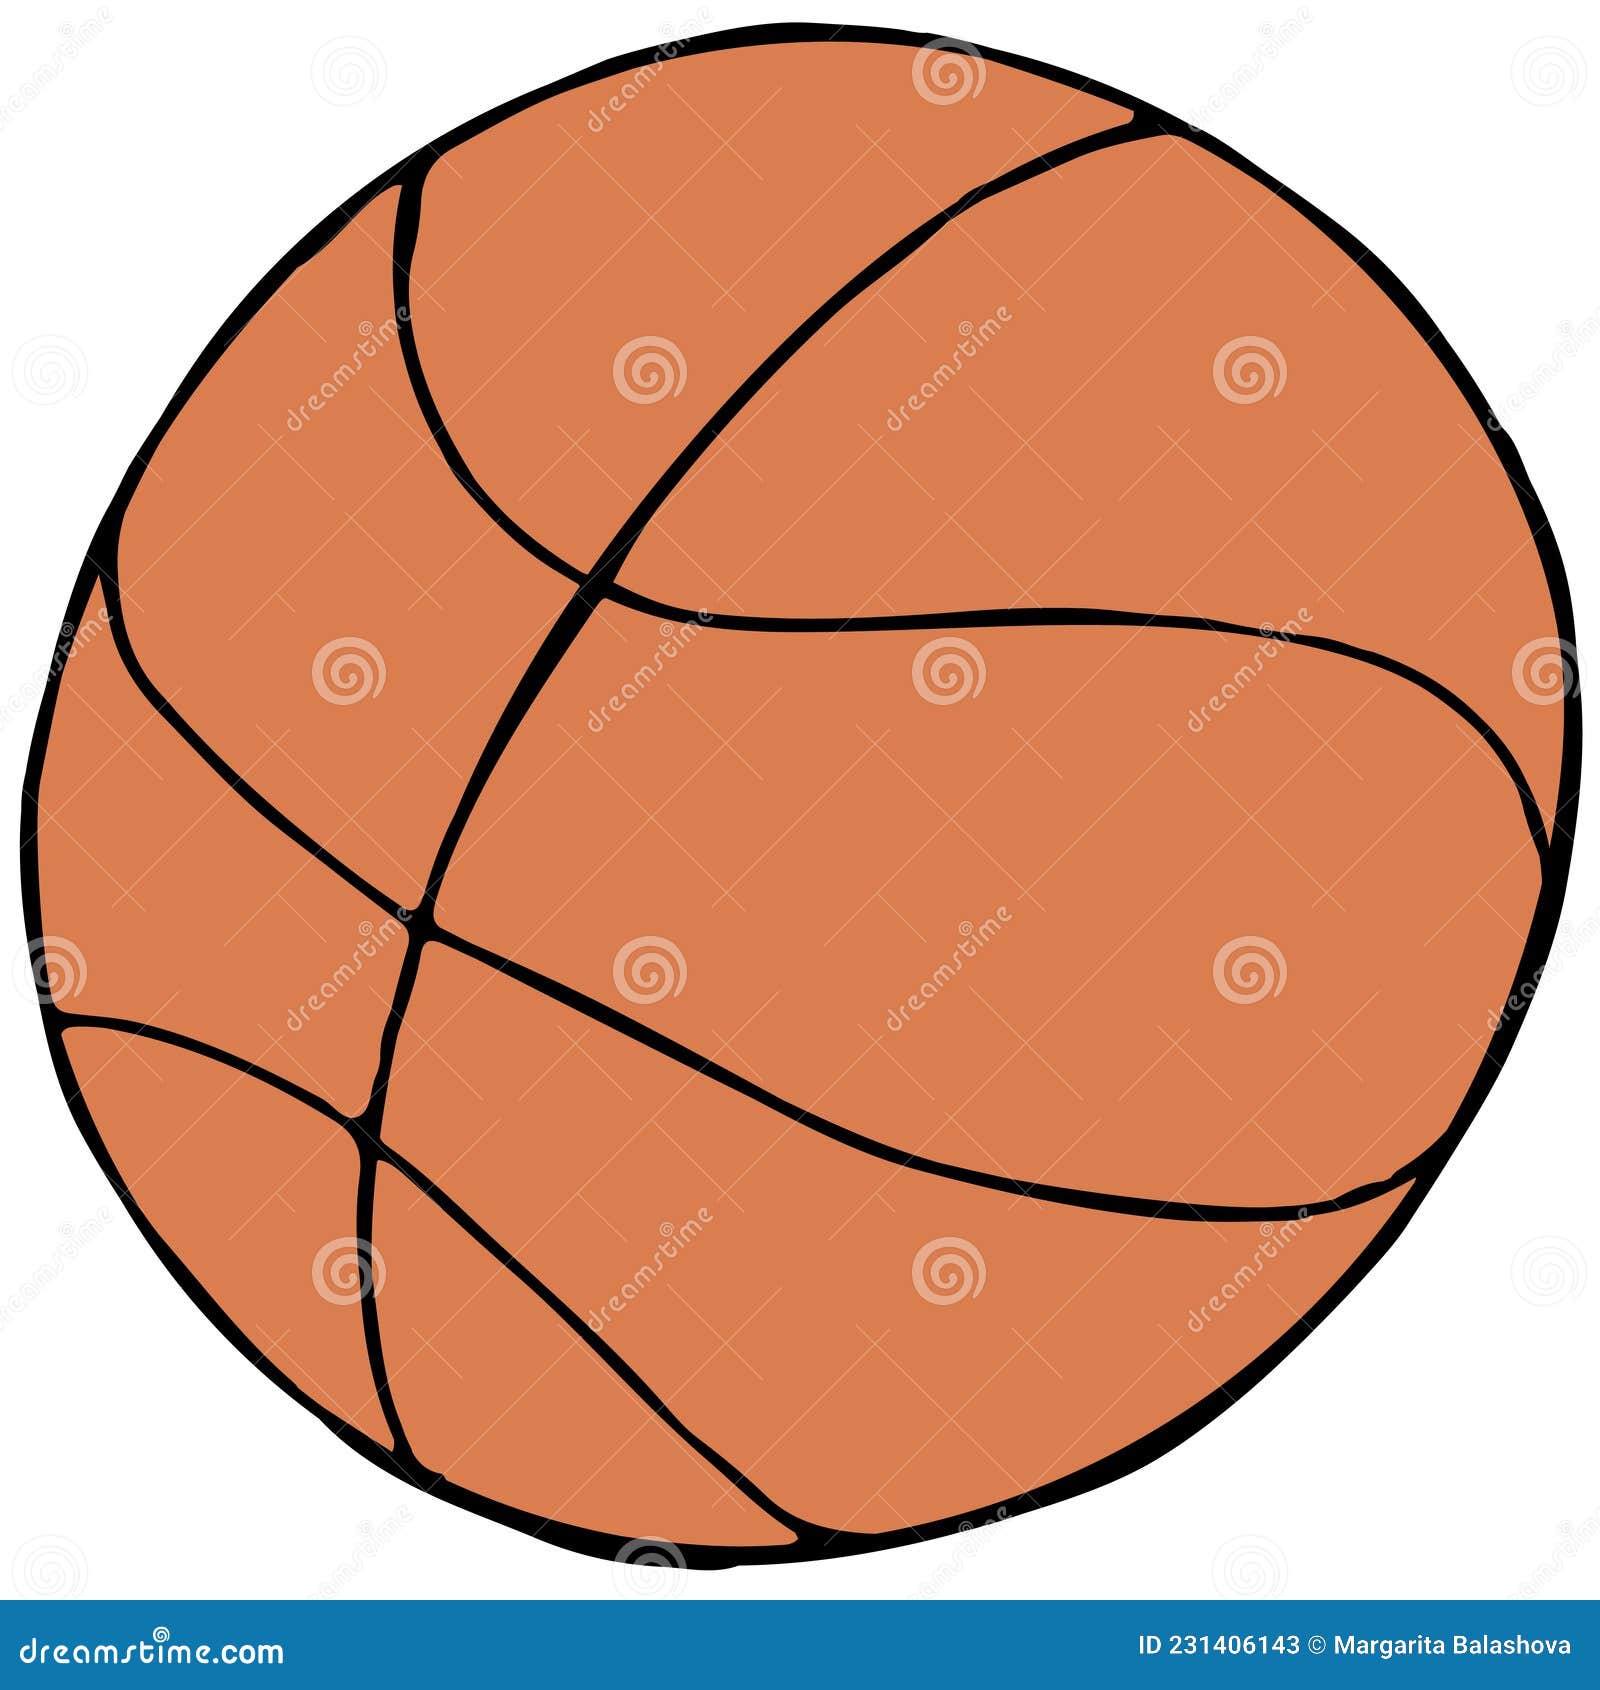 Brown Basketball Ball - Sports Equipment, Color Vector Illustration in  Doodle Style Stock Vector - Illustration of brown, color: 231406143